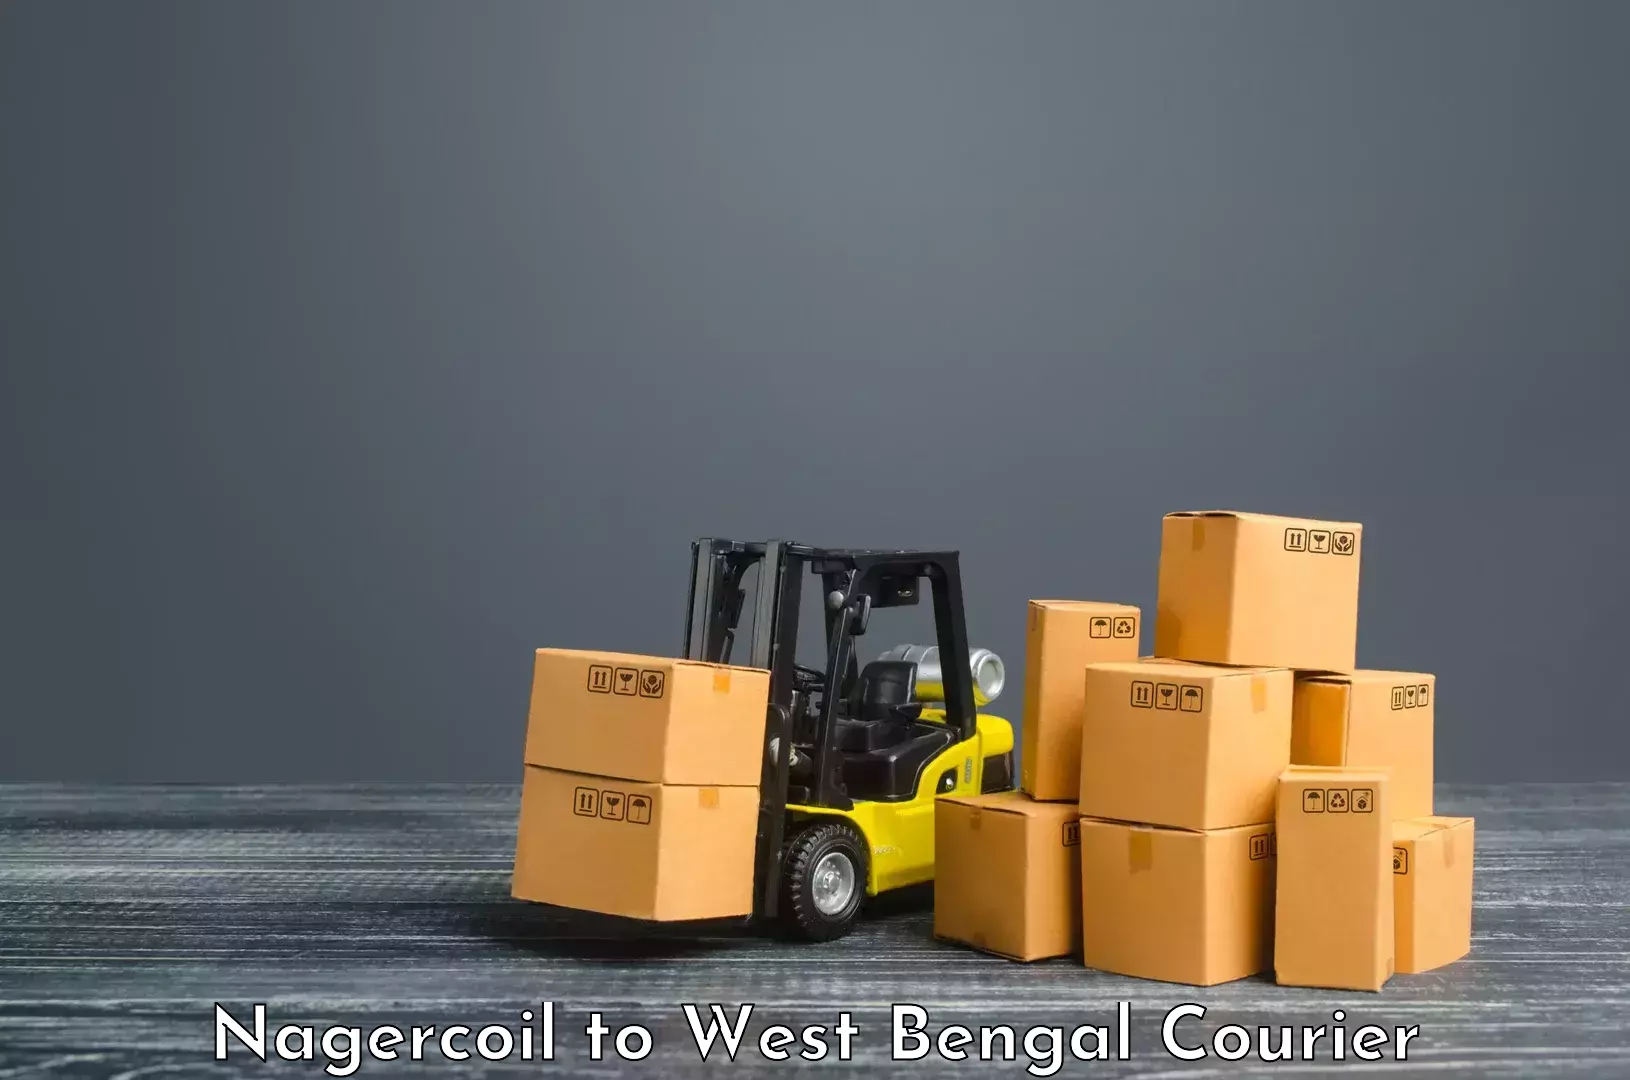 Reliable courier service Nagercoil to Bankura